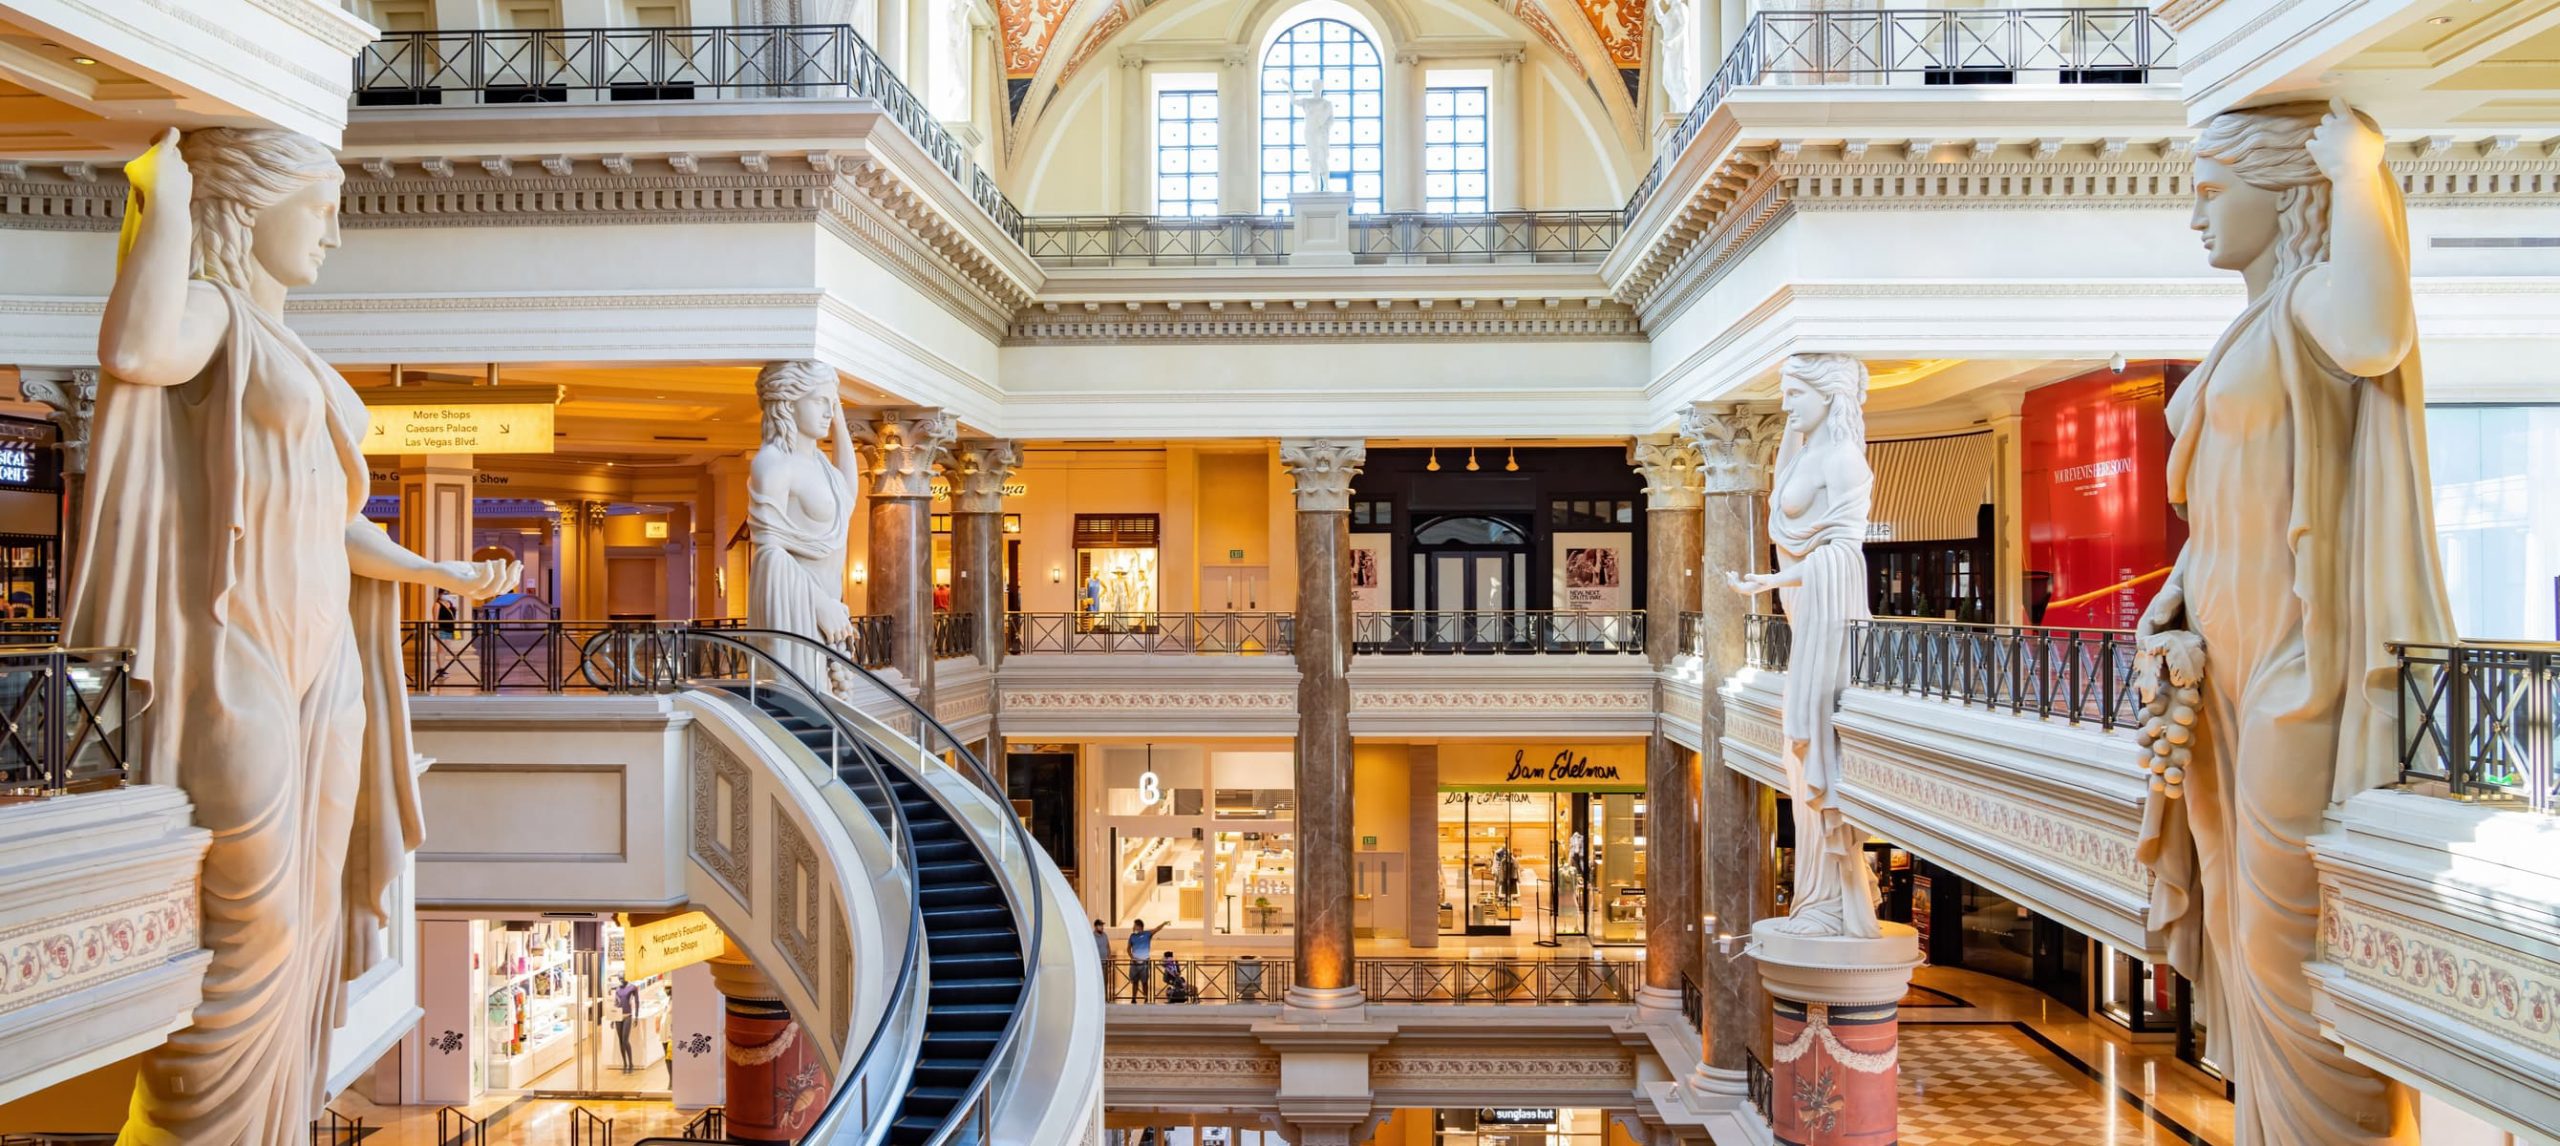 The 9 Best Places To Go Shopping in Las Vegas | CuddlyNest